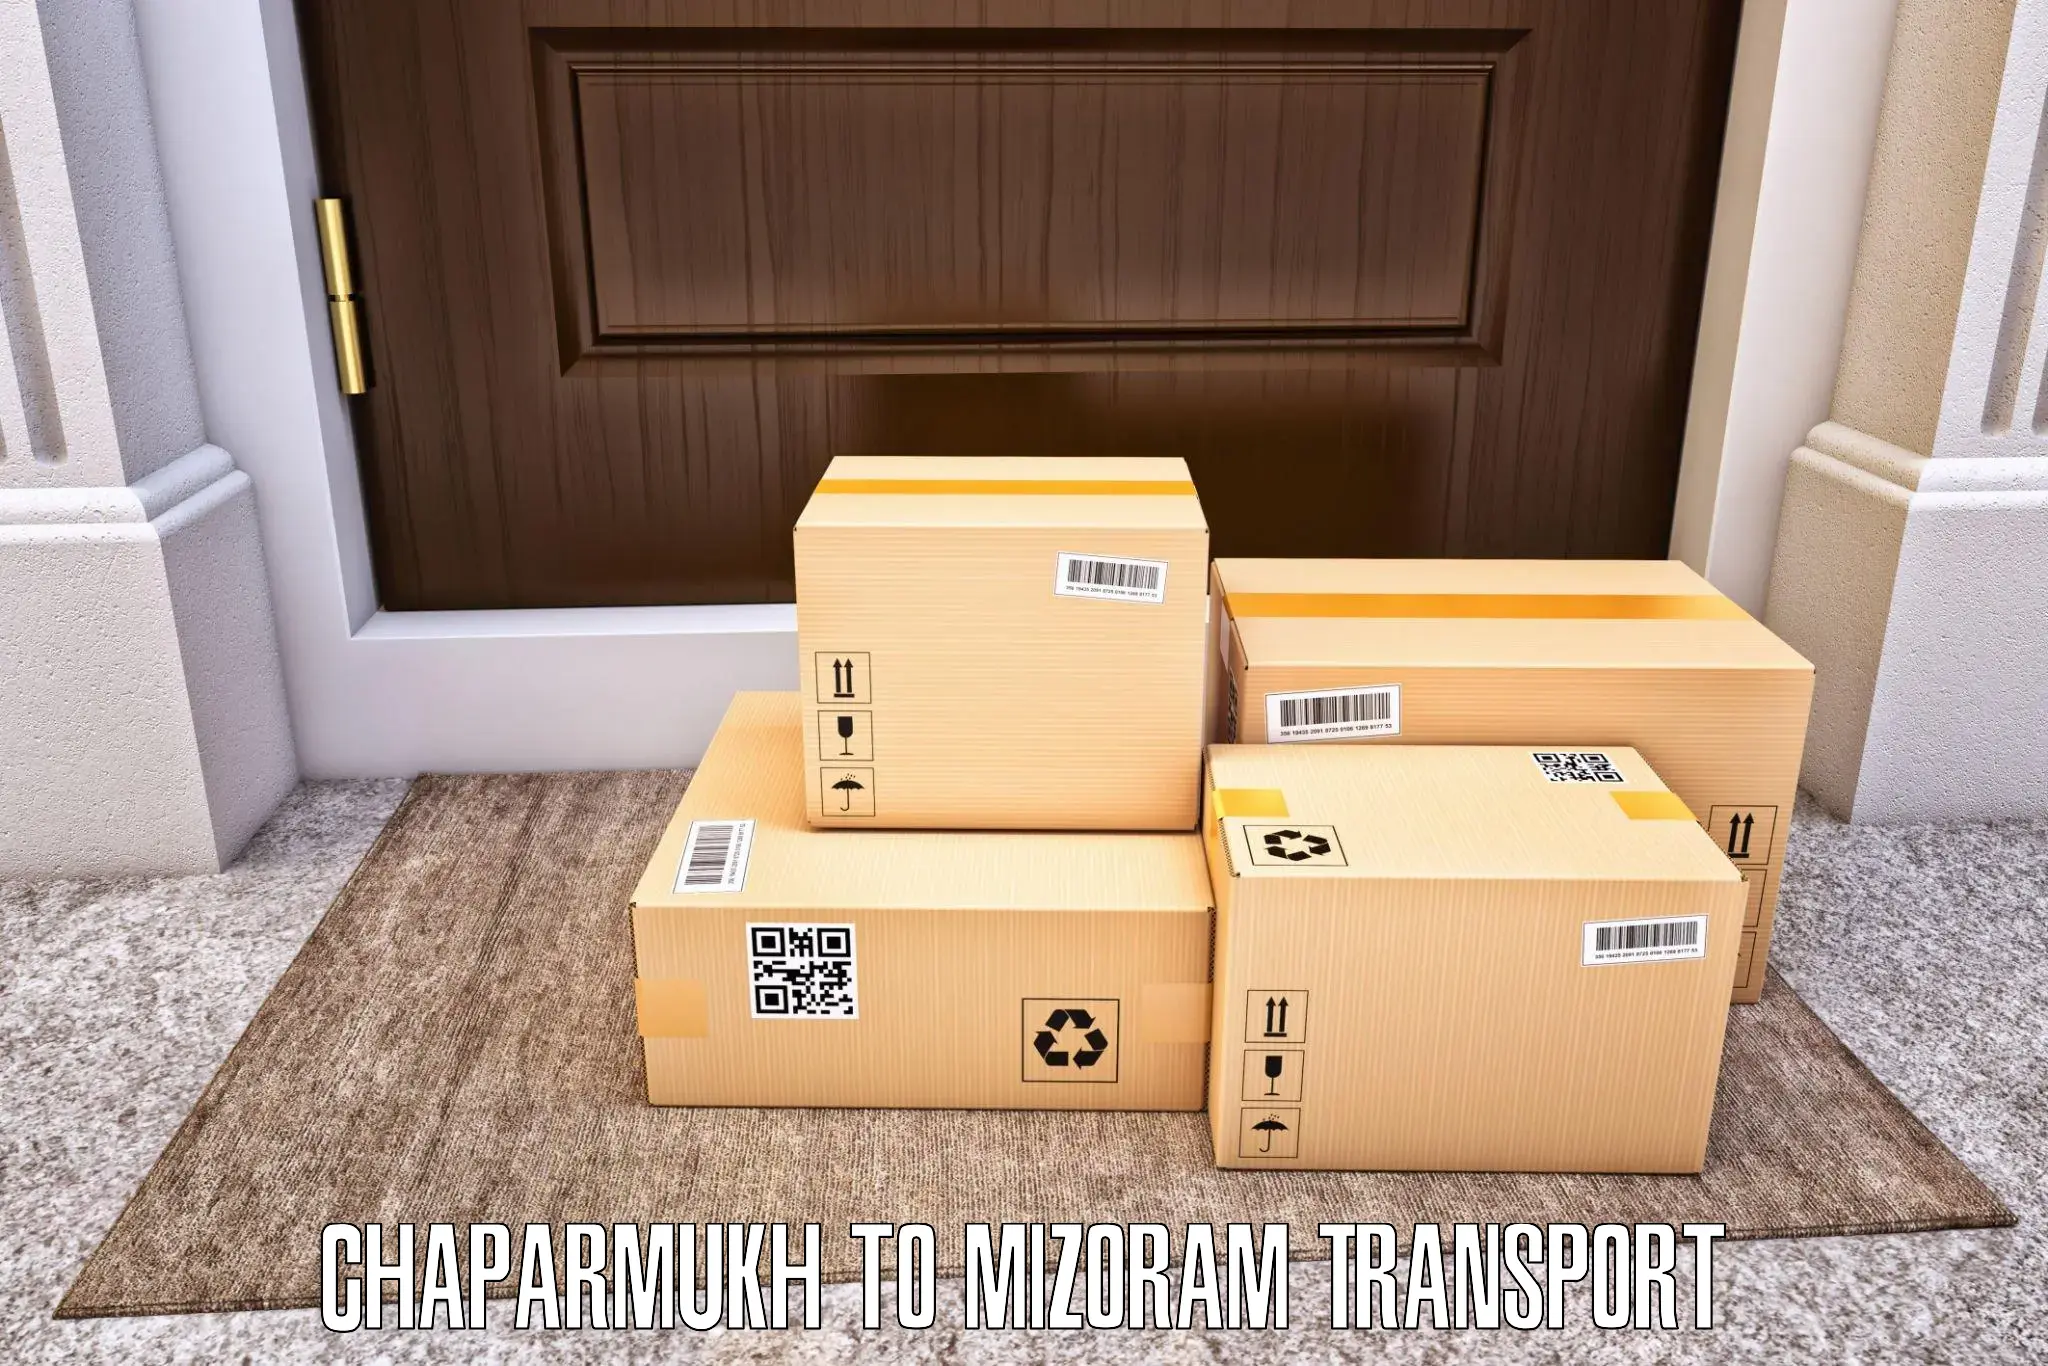 Road transport online services Chaparmukh to Siaha